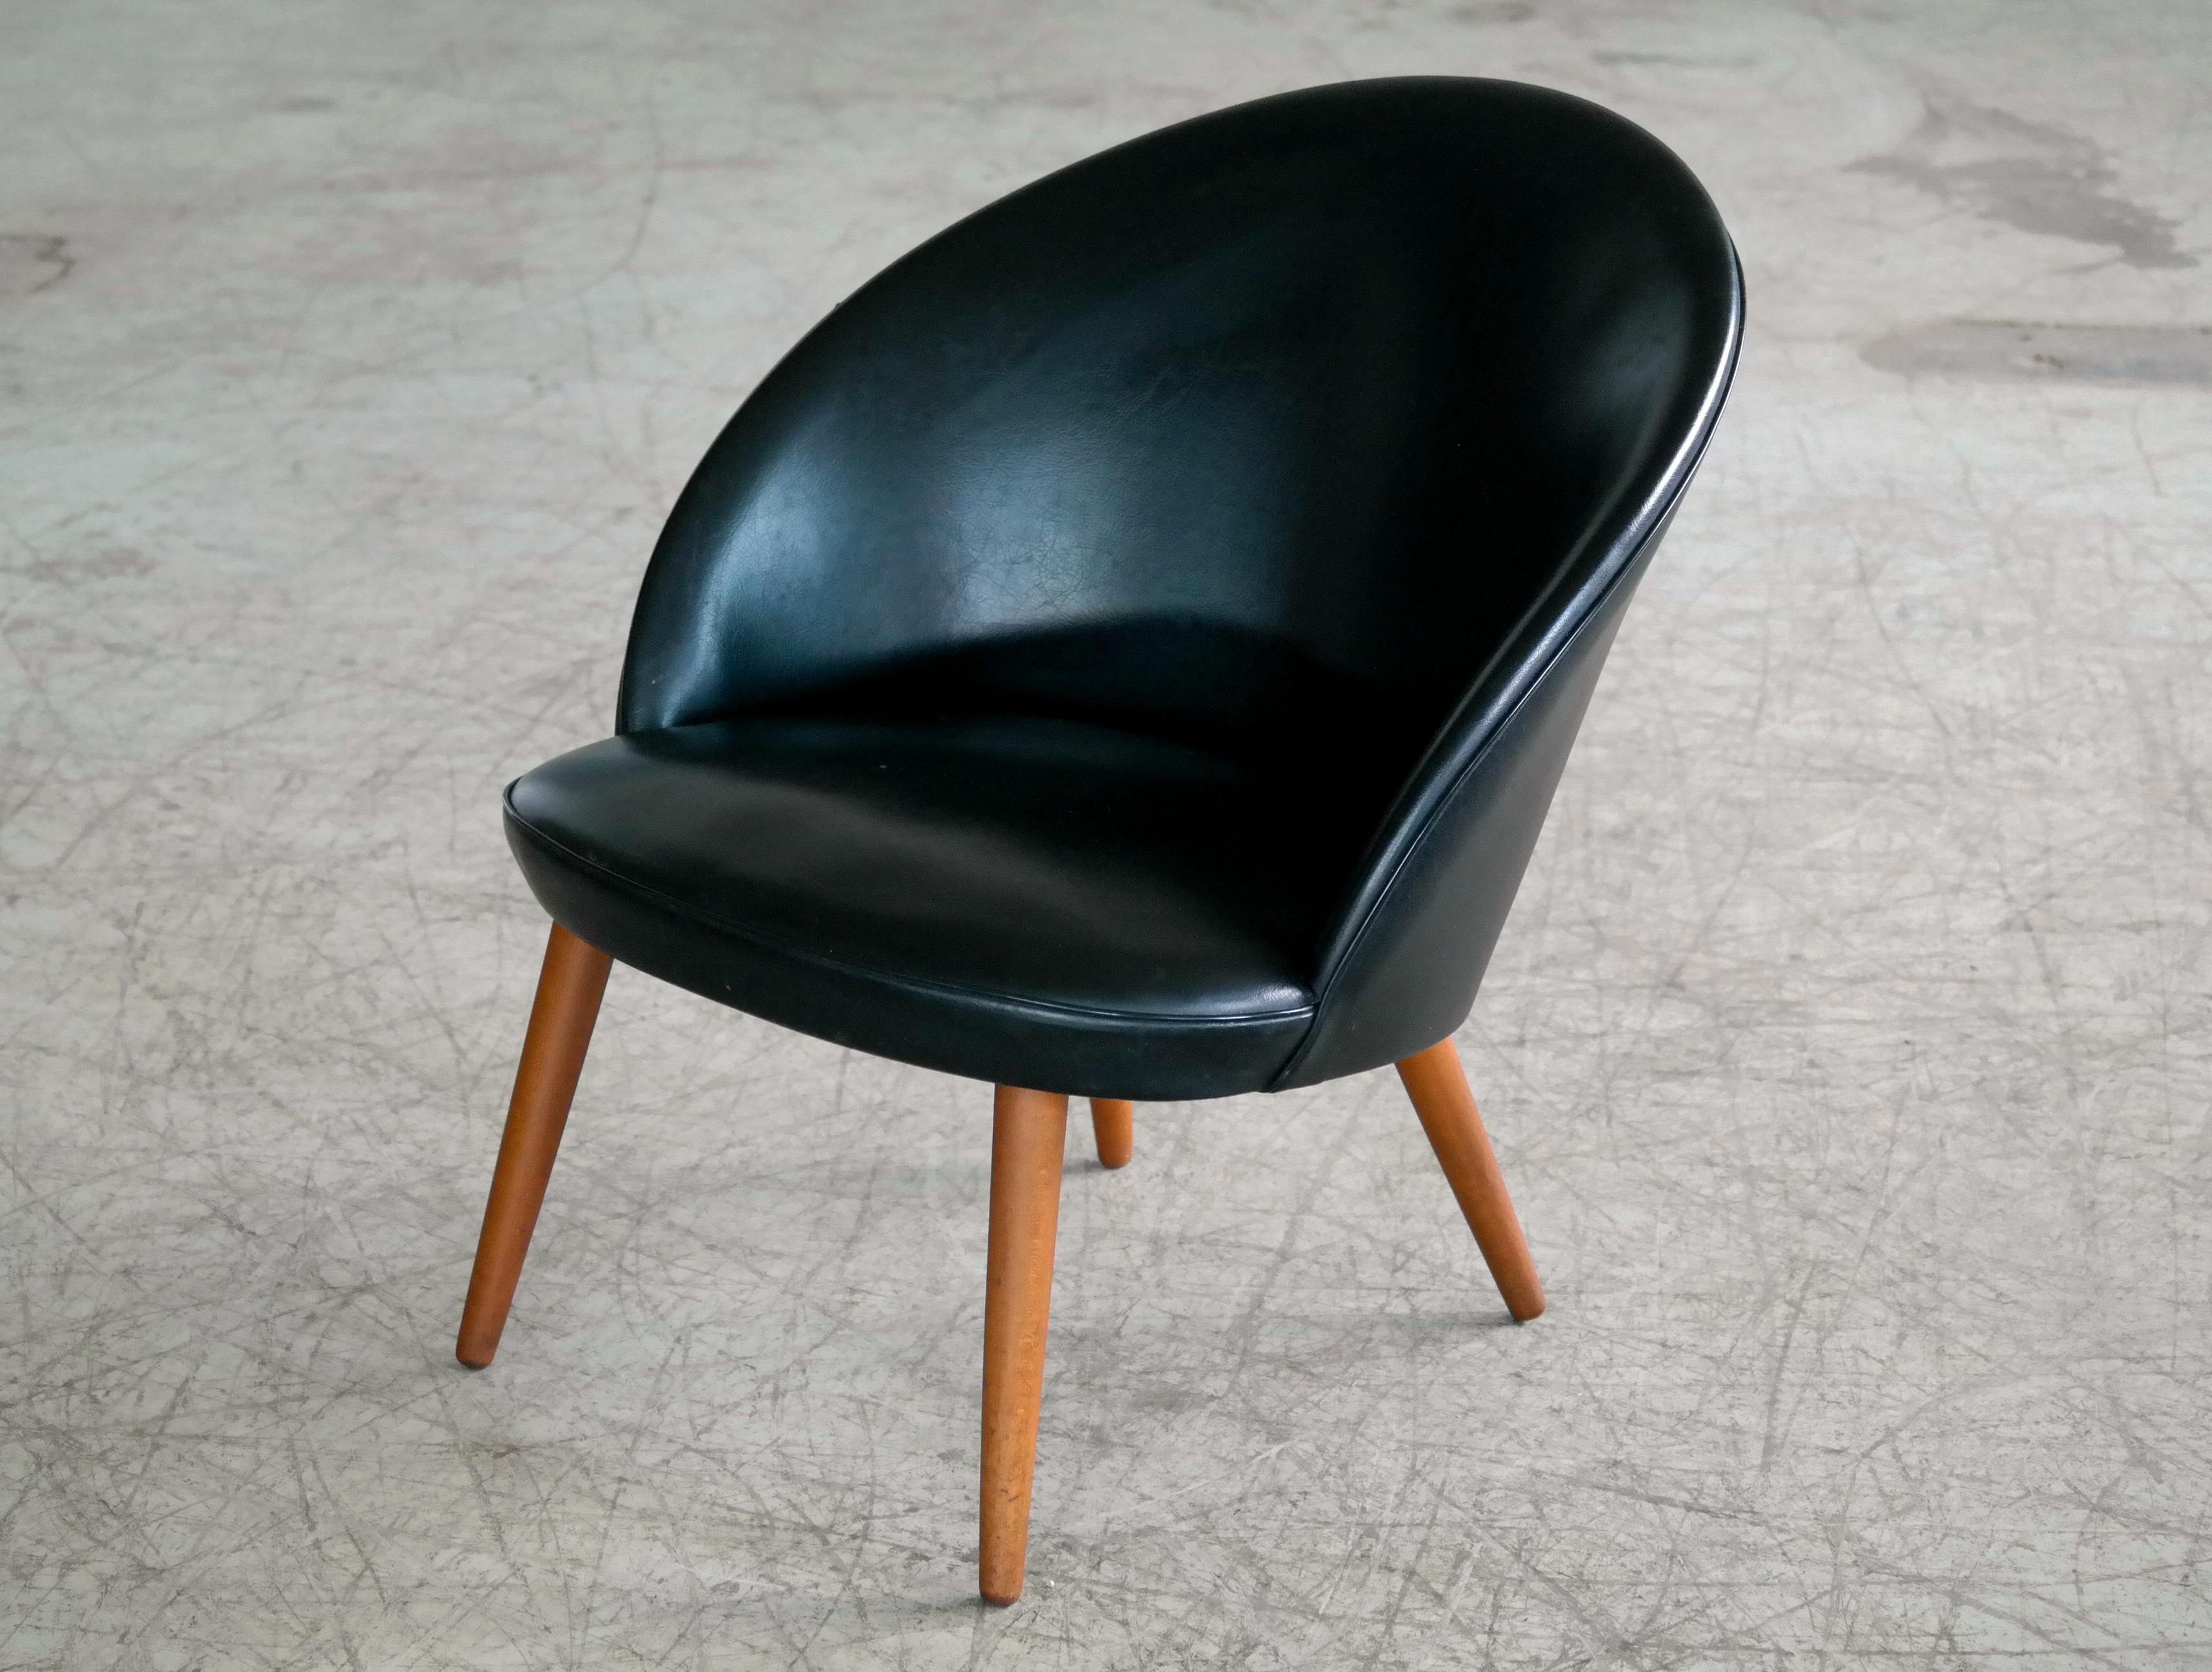 Classic small easy chair in black vinyl with curved back and legs in solid beech designed by Ejvind A. Johansson in 1958 as model 301 for Gotfred H. Petersen. Mr. Johansson is known for many of his Classic designs many of which were made during his